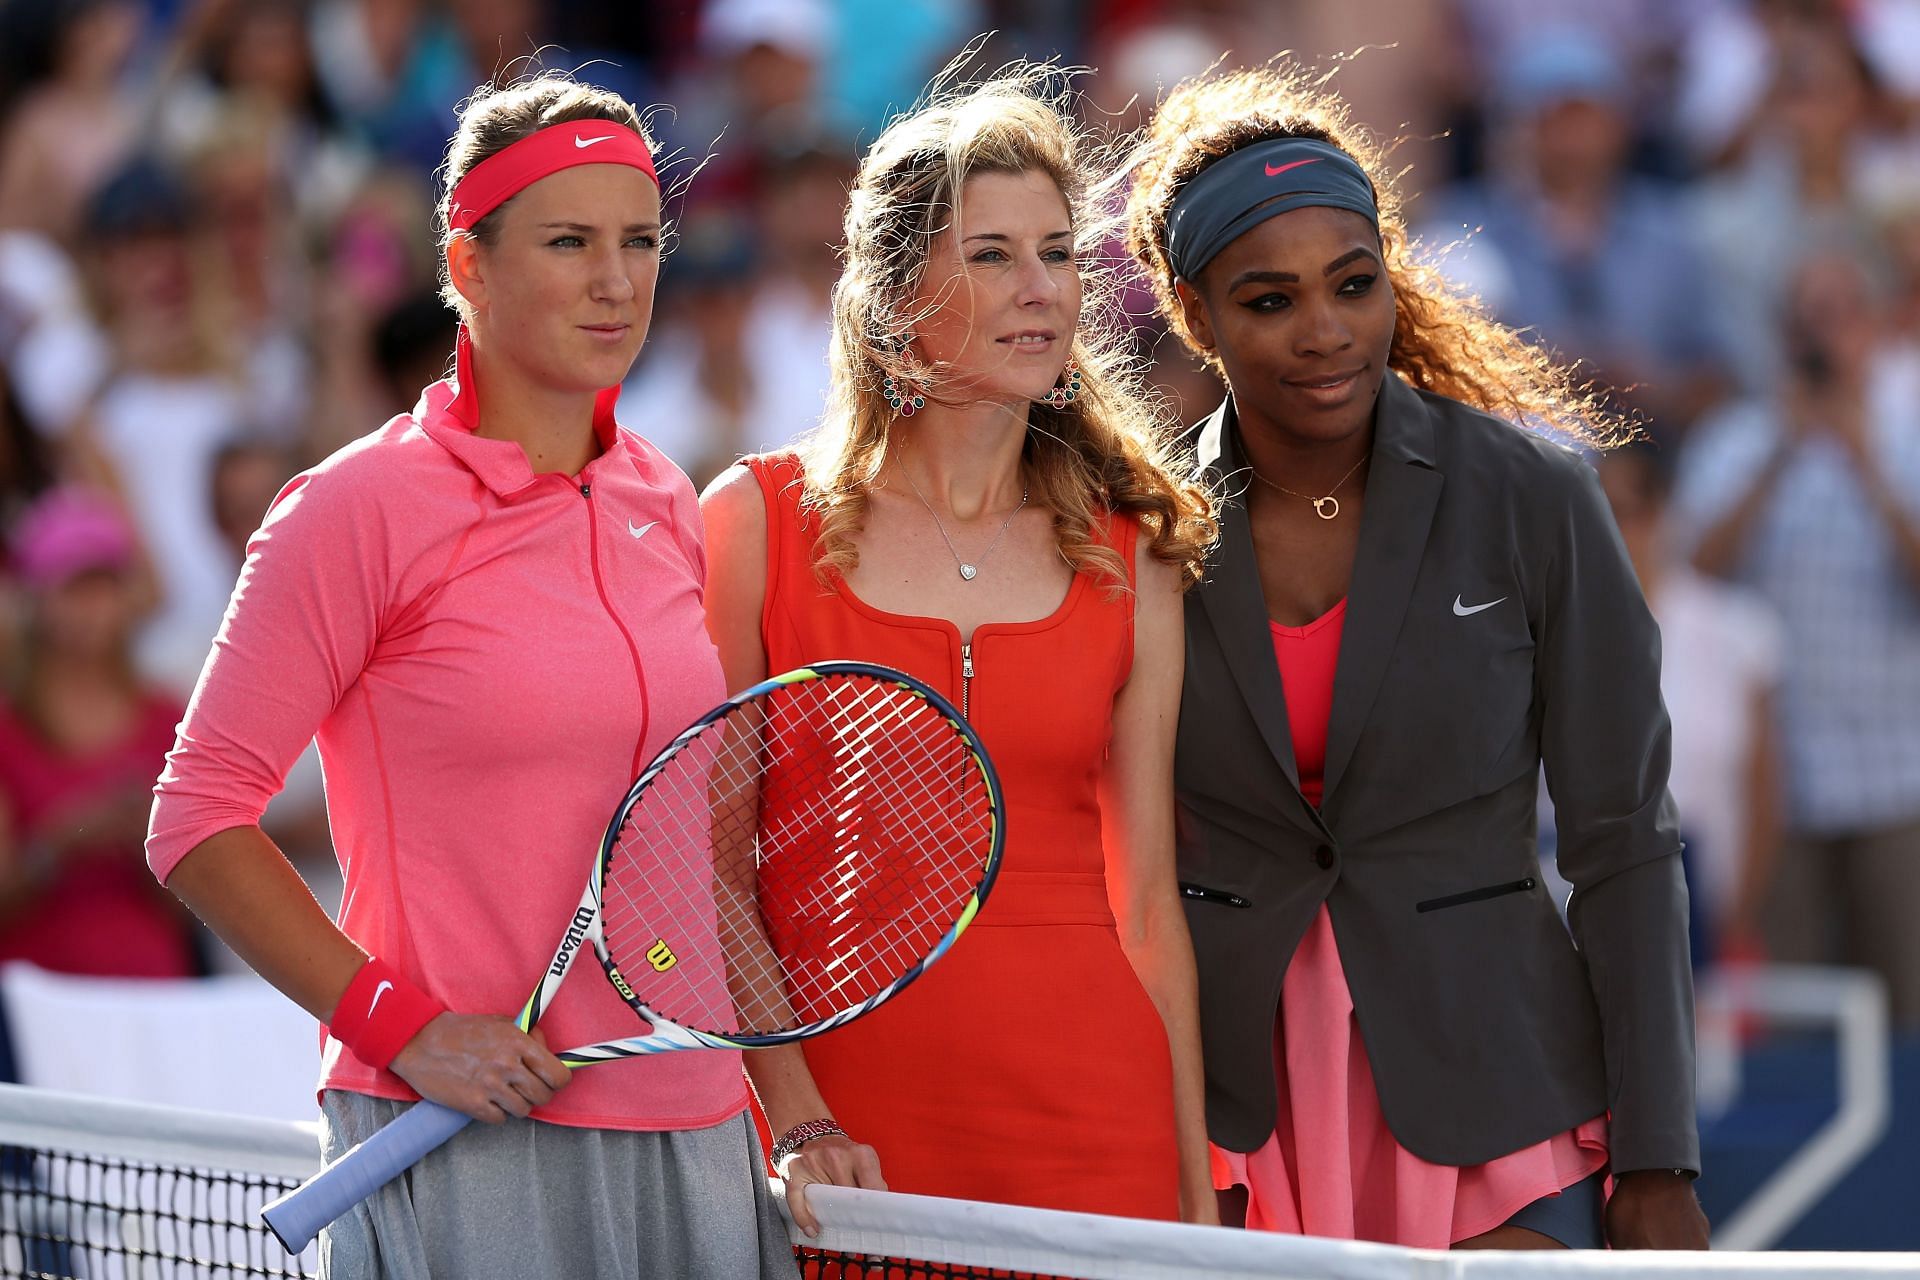 Monica Seles with Serena Williams and Victoria Azarenka at the 2013 US Open final